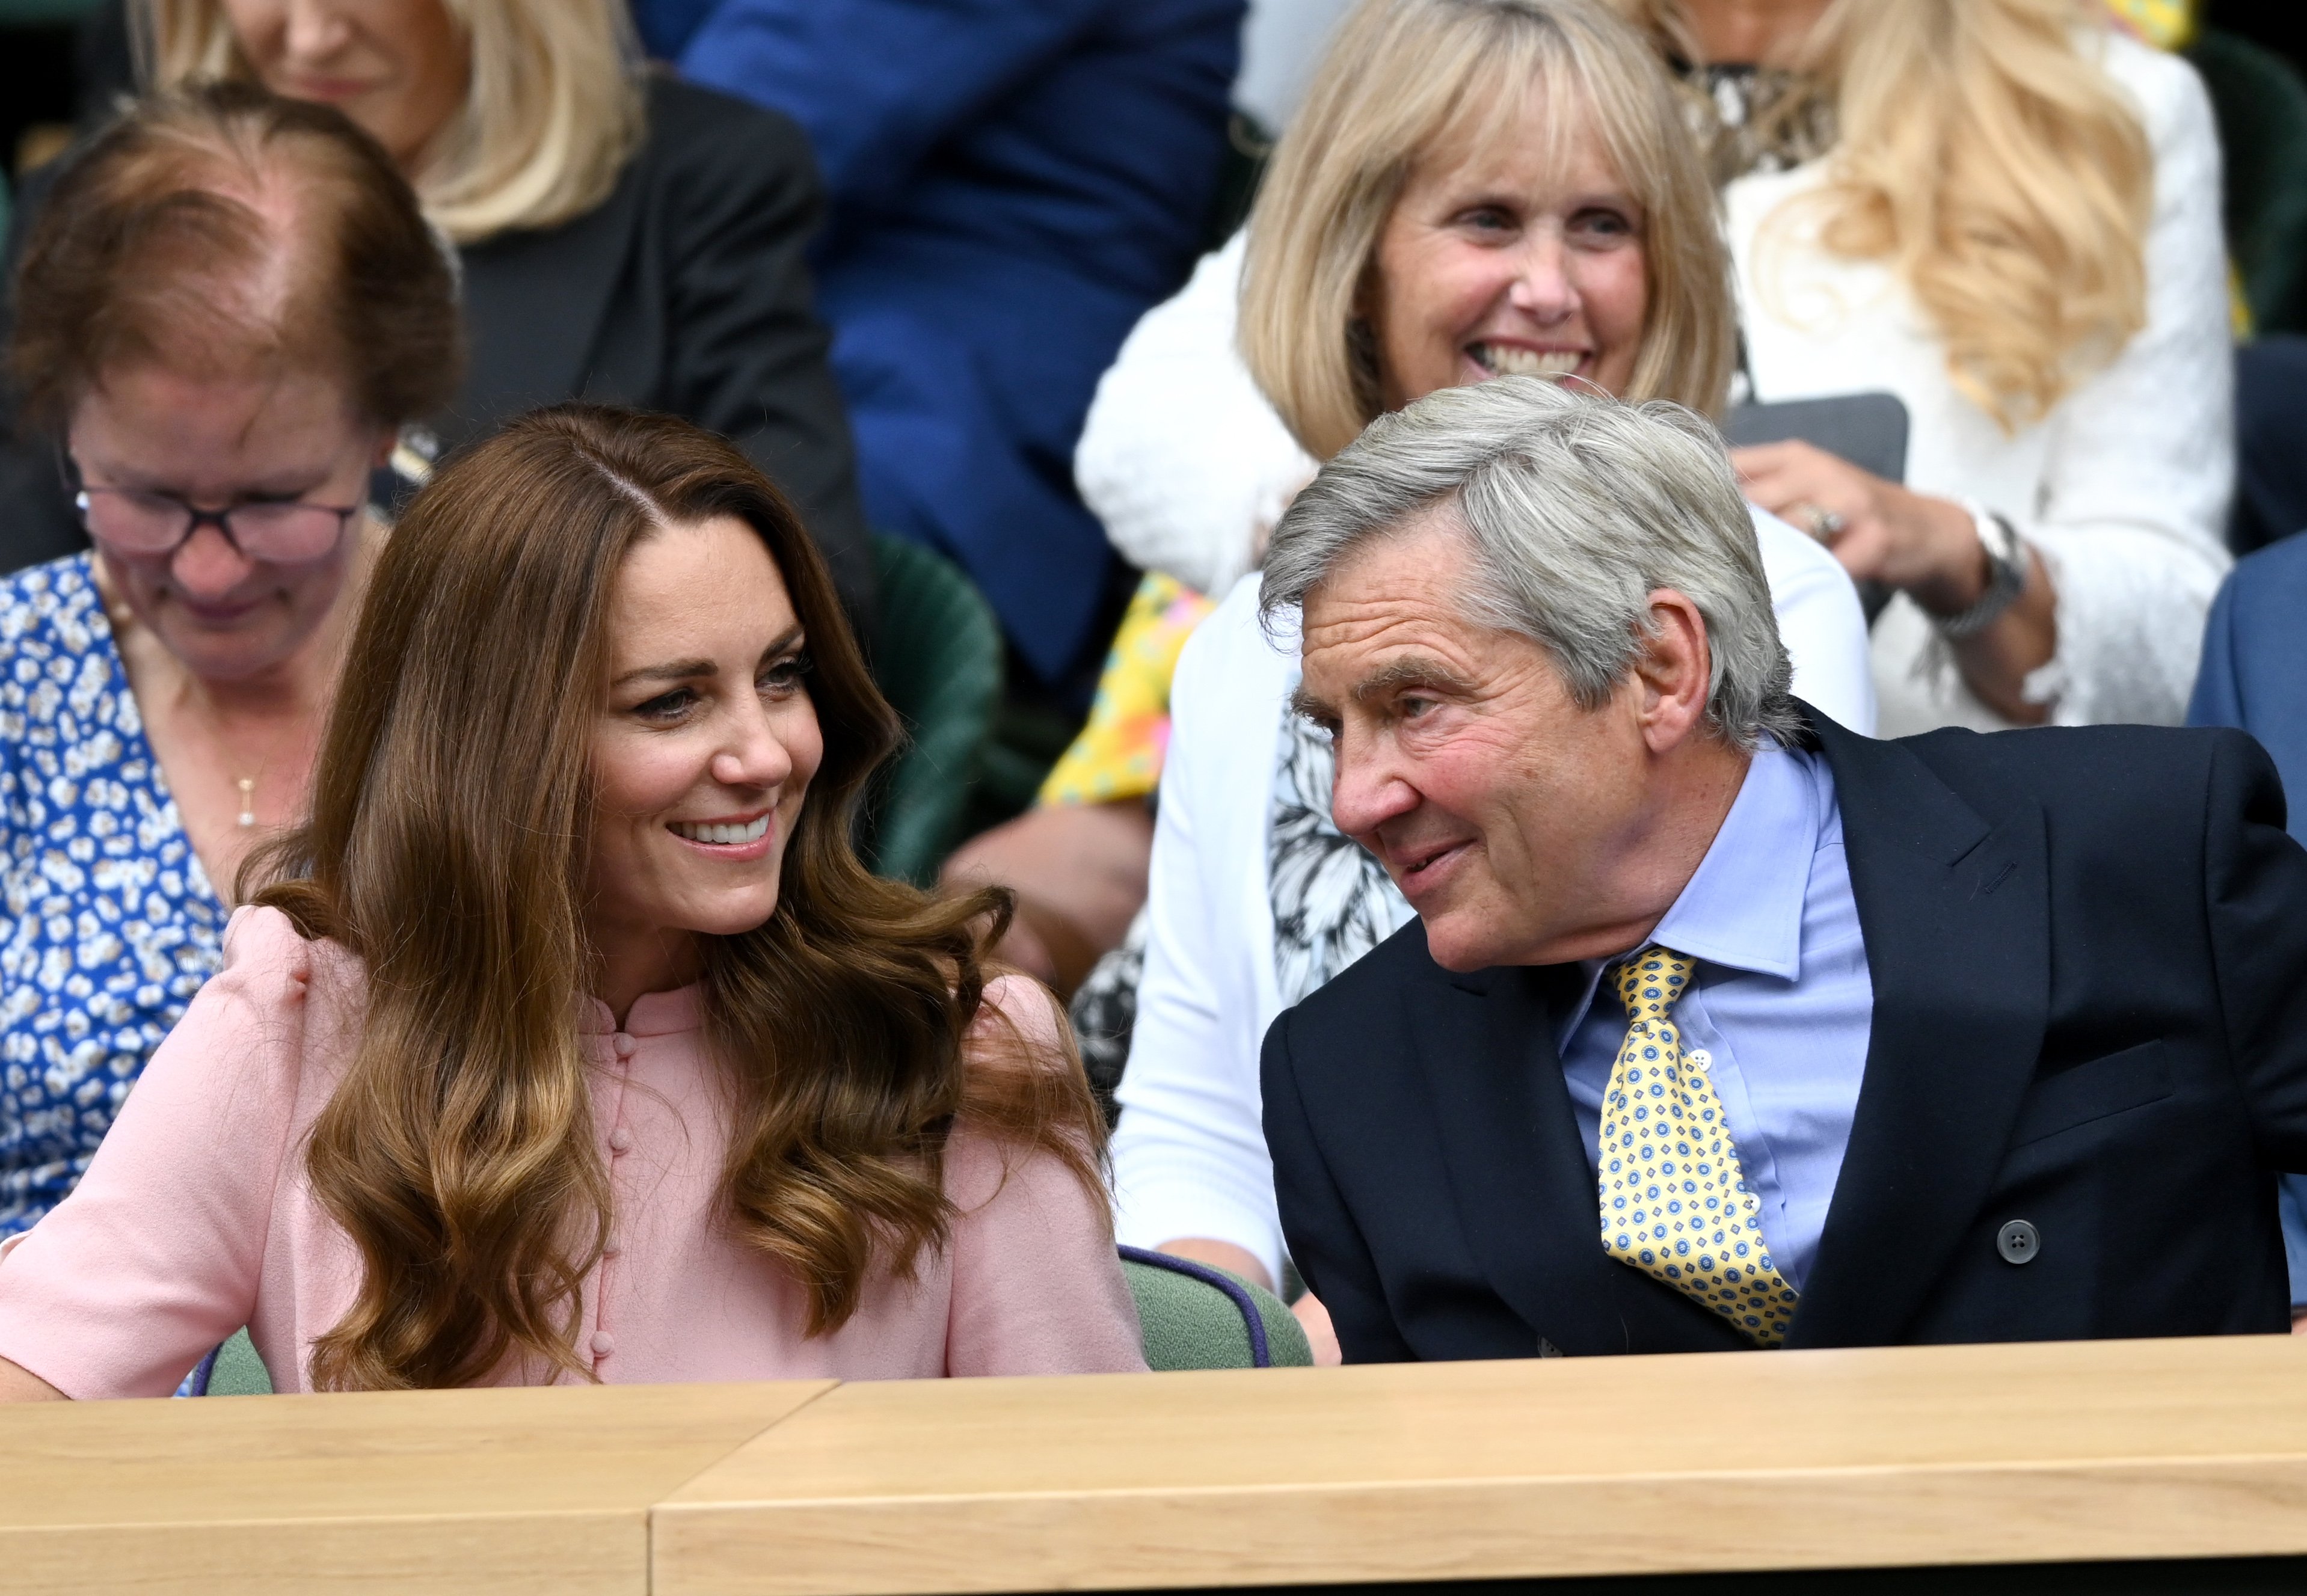 Michael Middleton and his daughter Kate Middleton during day 13 of the Wimbledon Tennis Championships at All England Lawn Tennis and Croquet Club on July 11, 2021 in London, England. / Source: Getty Images